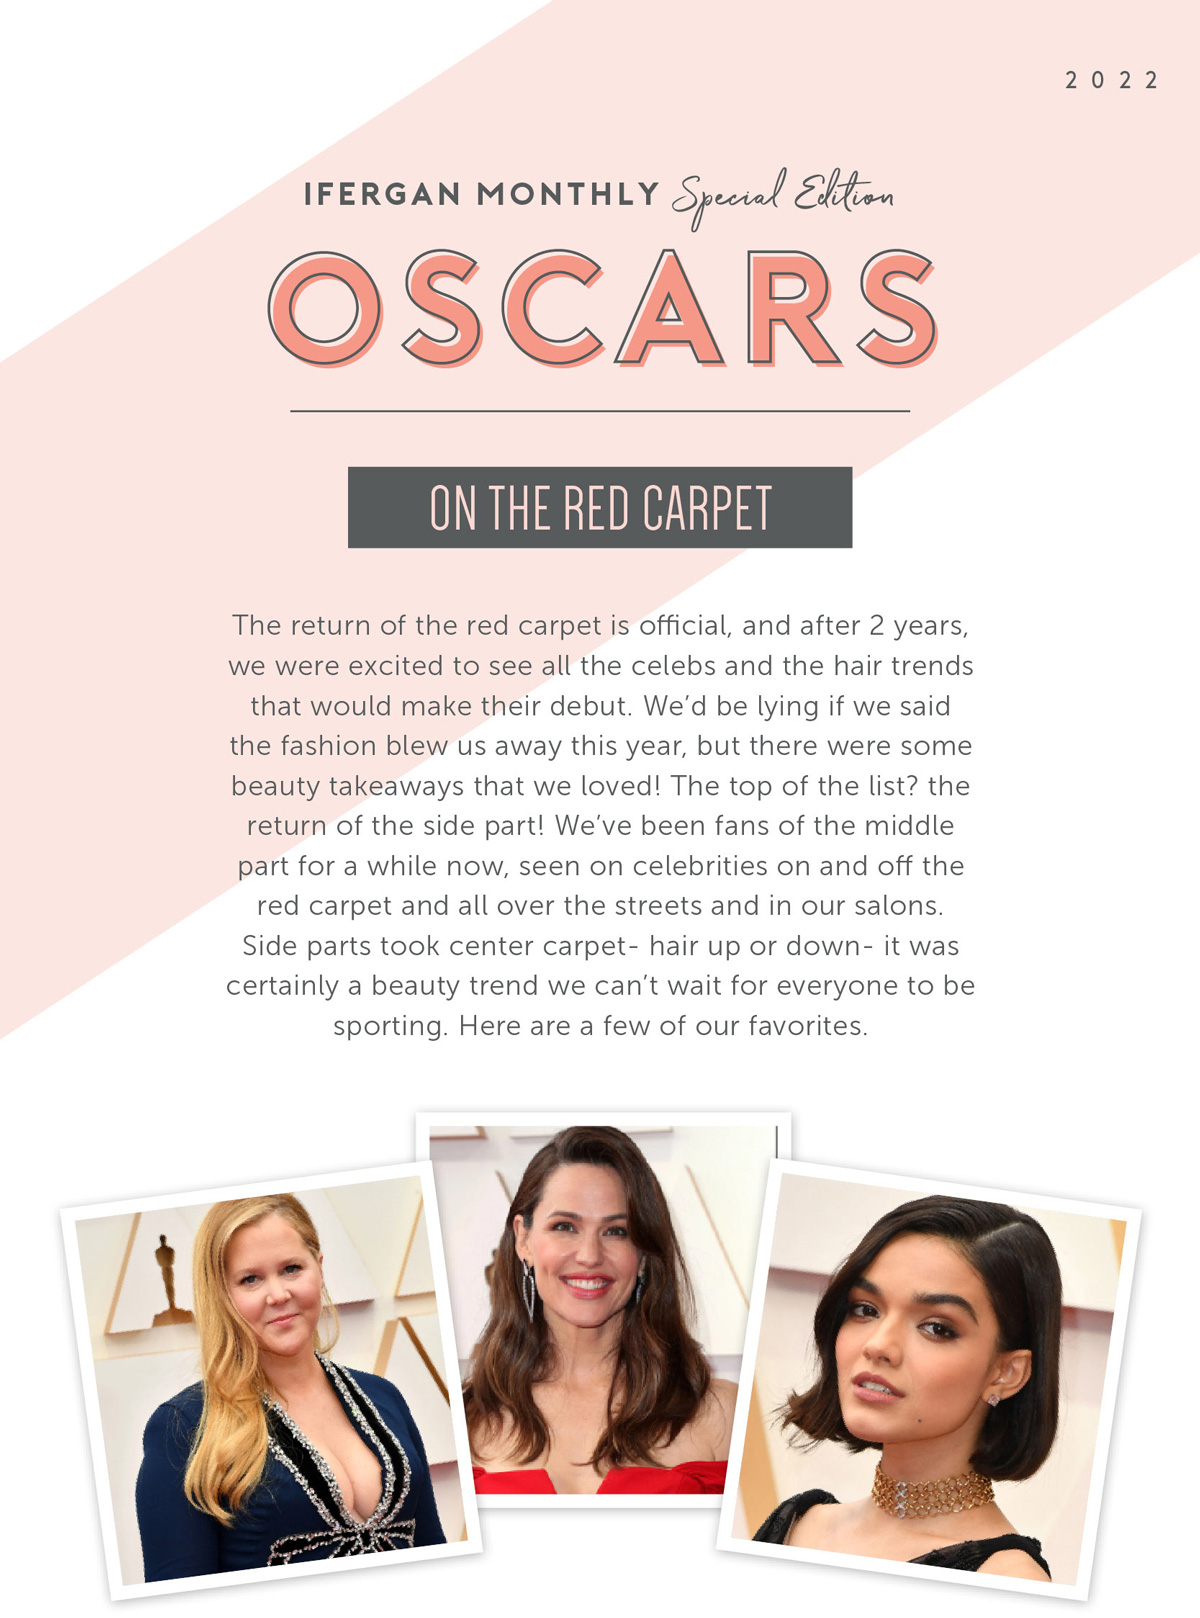 April Newsletter - Oscars Red Carpet - The return of the red carpet is official, and after 2 years, we were excited to see all the celebs and the hair trends that would make their debut. We’d be lying if we said the fashion blew us away this year, but there were some beauty takeaways that we loved! The top of the list? the return of the side part! We’ve been fans of the middle part for a while now, seen on celebrities on and off the red carpet and all over the streets and in our salons. Side parts took center carpet- hair up or down- it was certainly a beauty trend we can’t wait for everyone to be sporting. Here are a few of our favorites. 